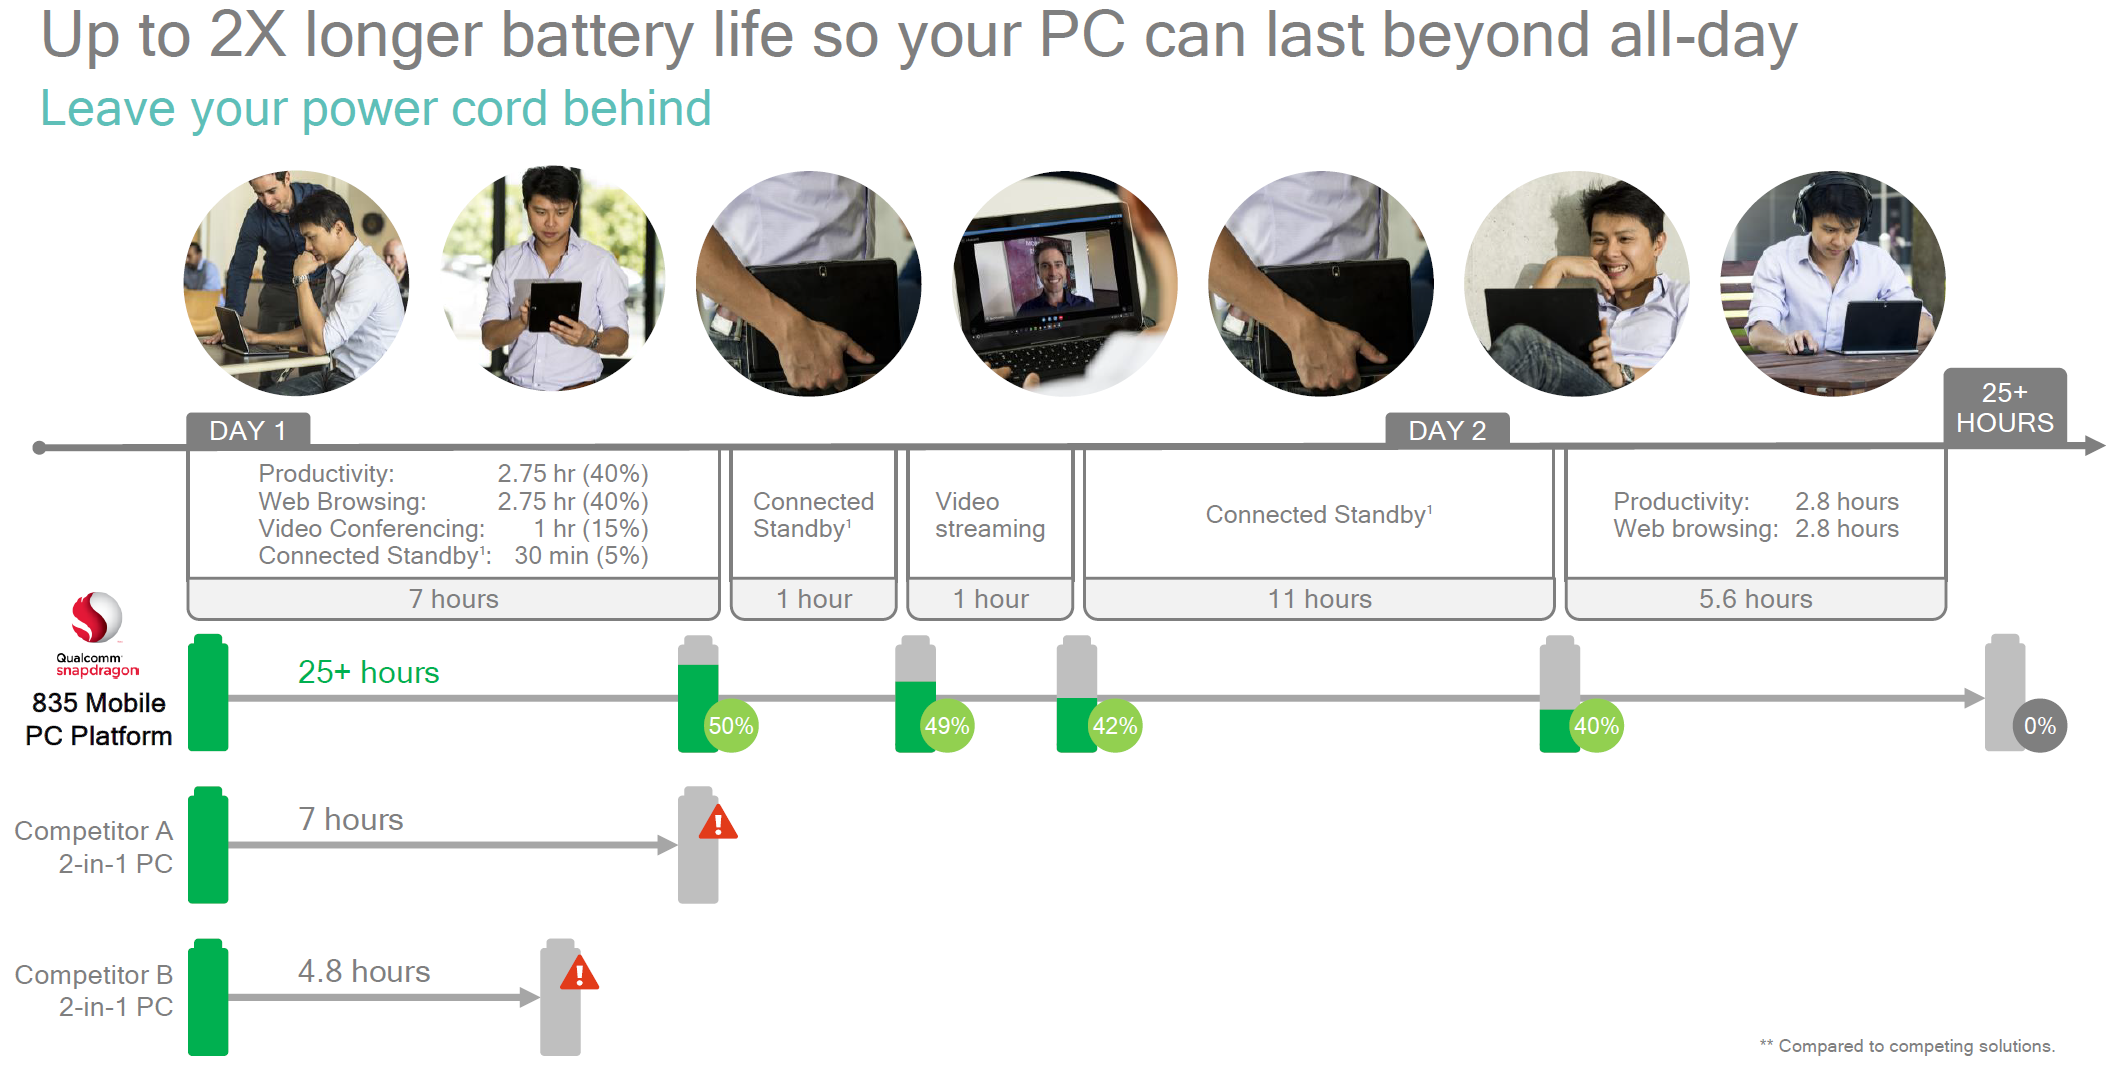 Smartphone Guts Are Coming To Windows Laptops, And It Could Triple Your Battery Life